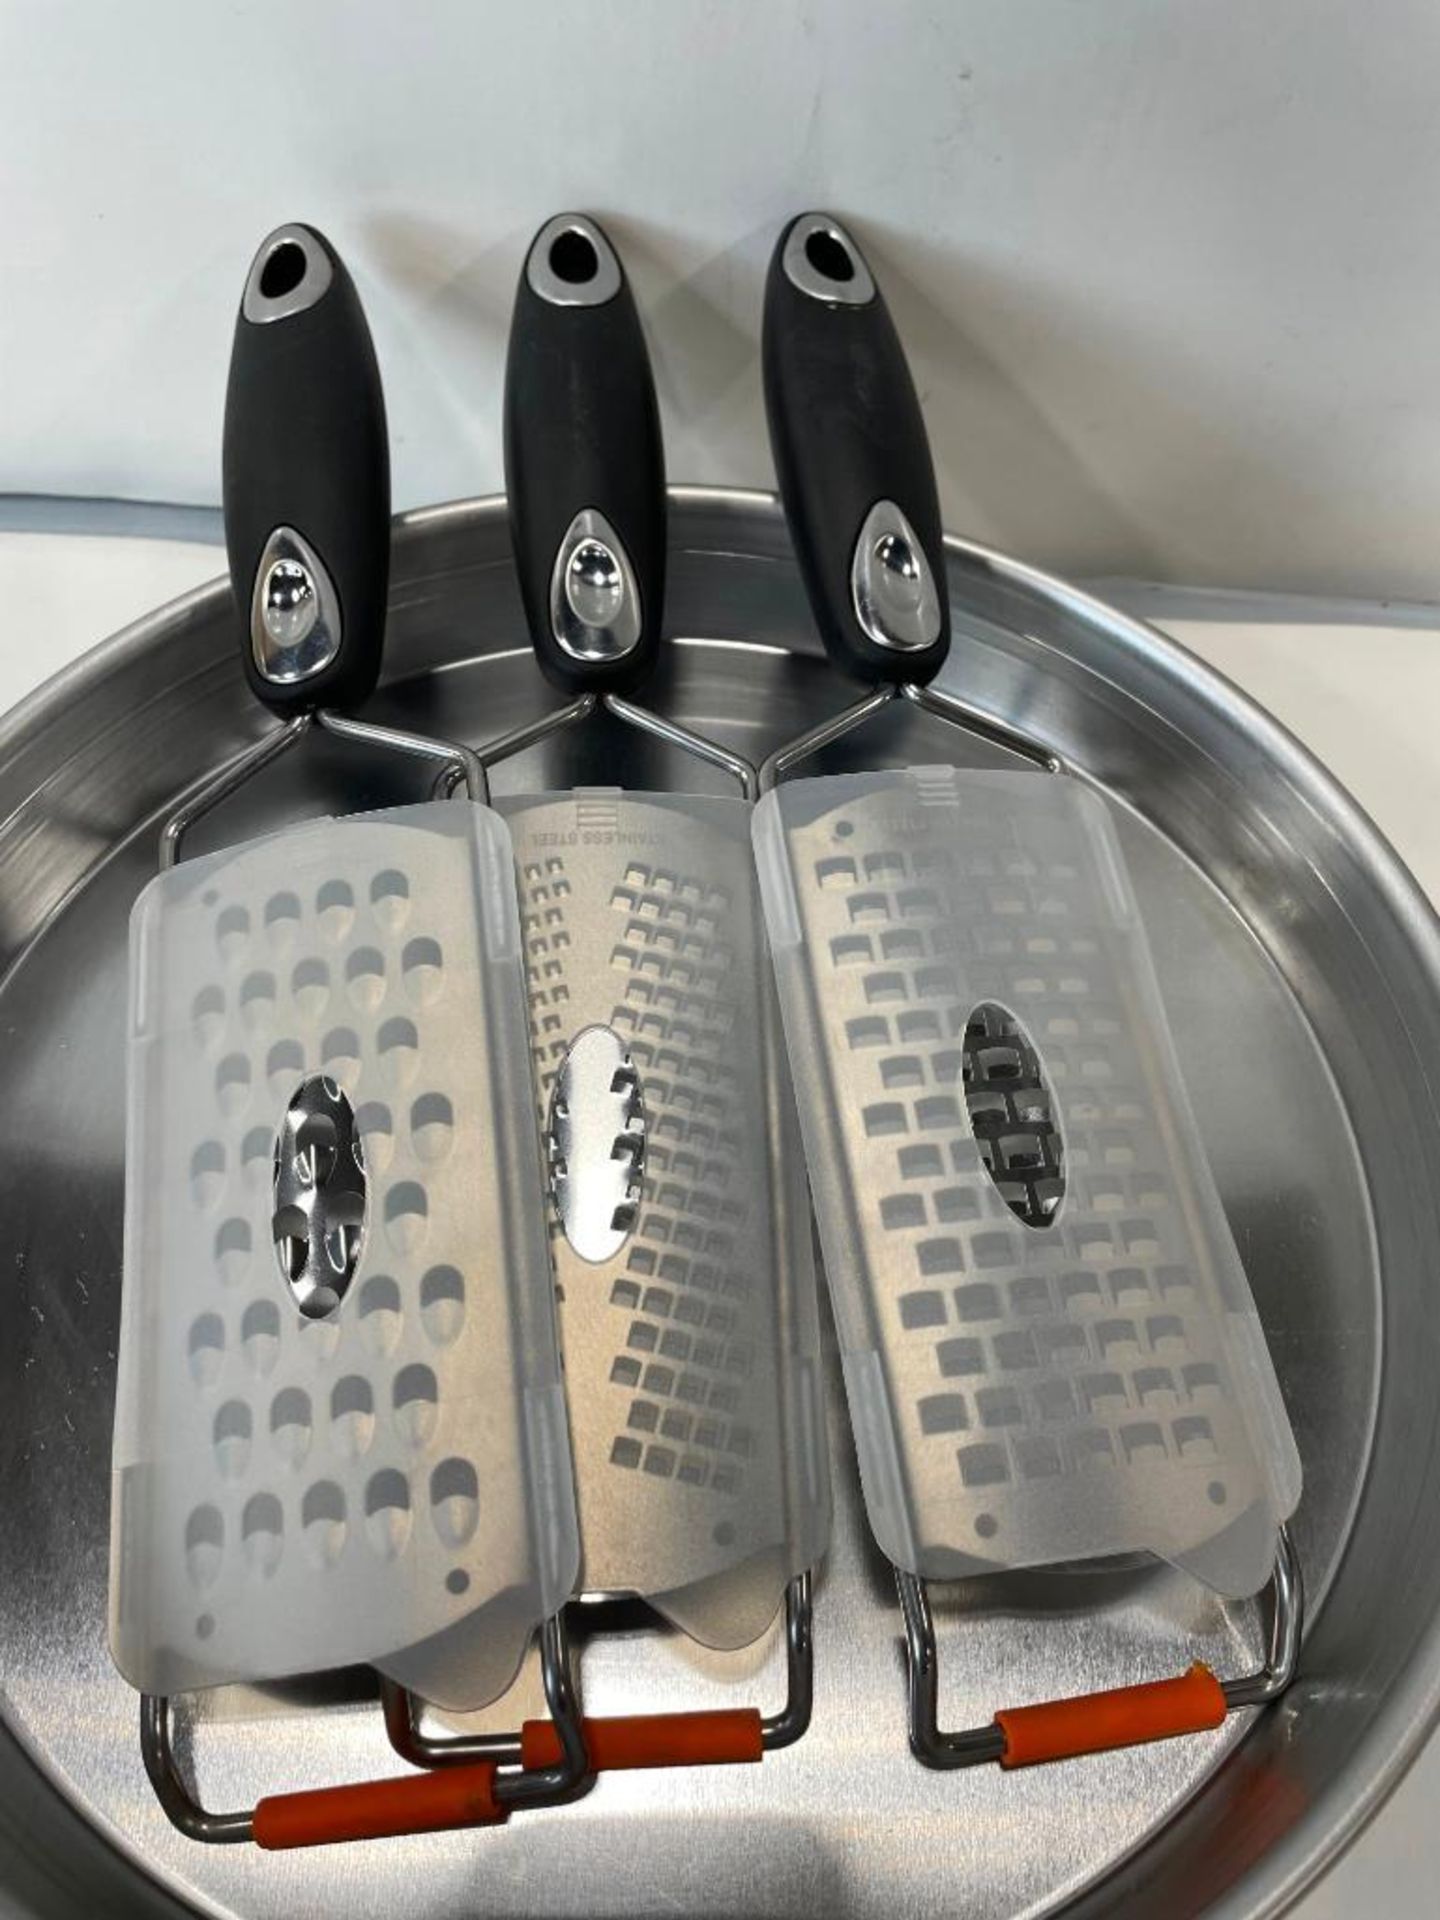 11" PIZZA PAN SET INCLUDING: (4) 15" PIZZA PANS, (2) PIZZA CUTTERS & (3) GRATERS - Image 8 of 9